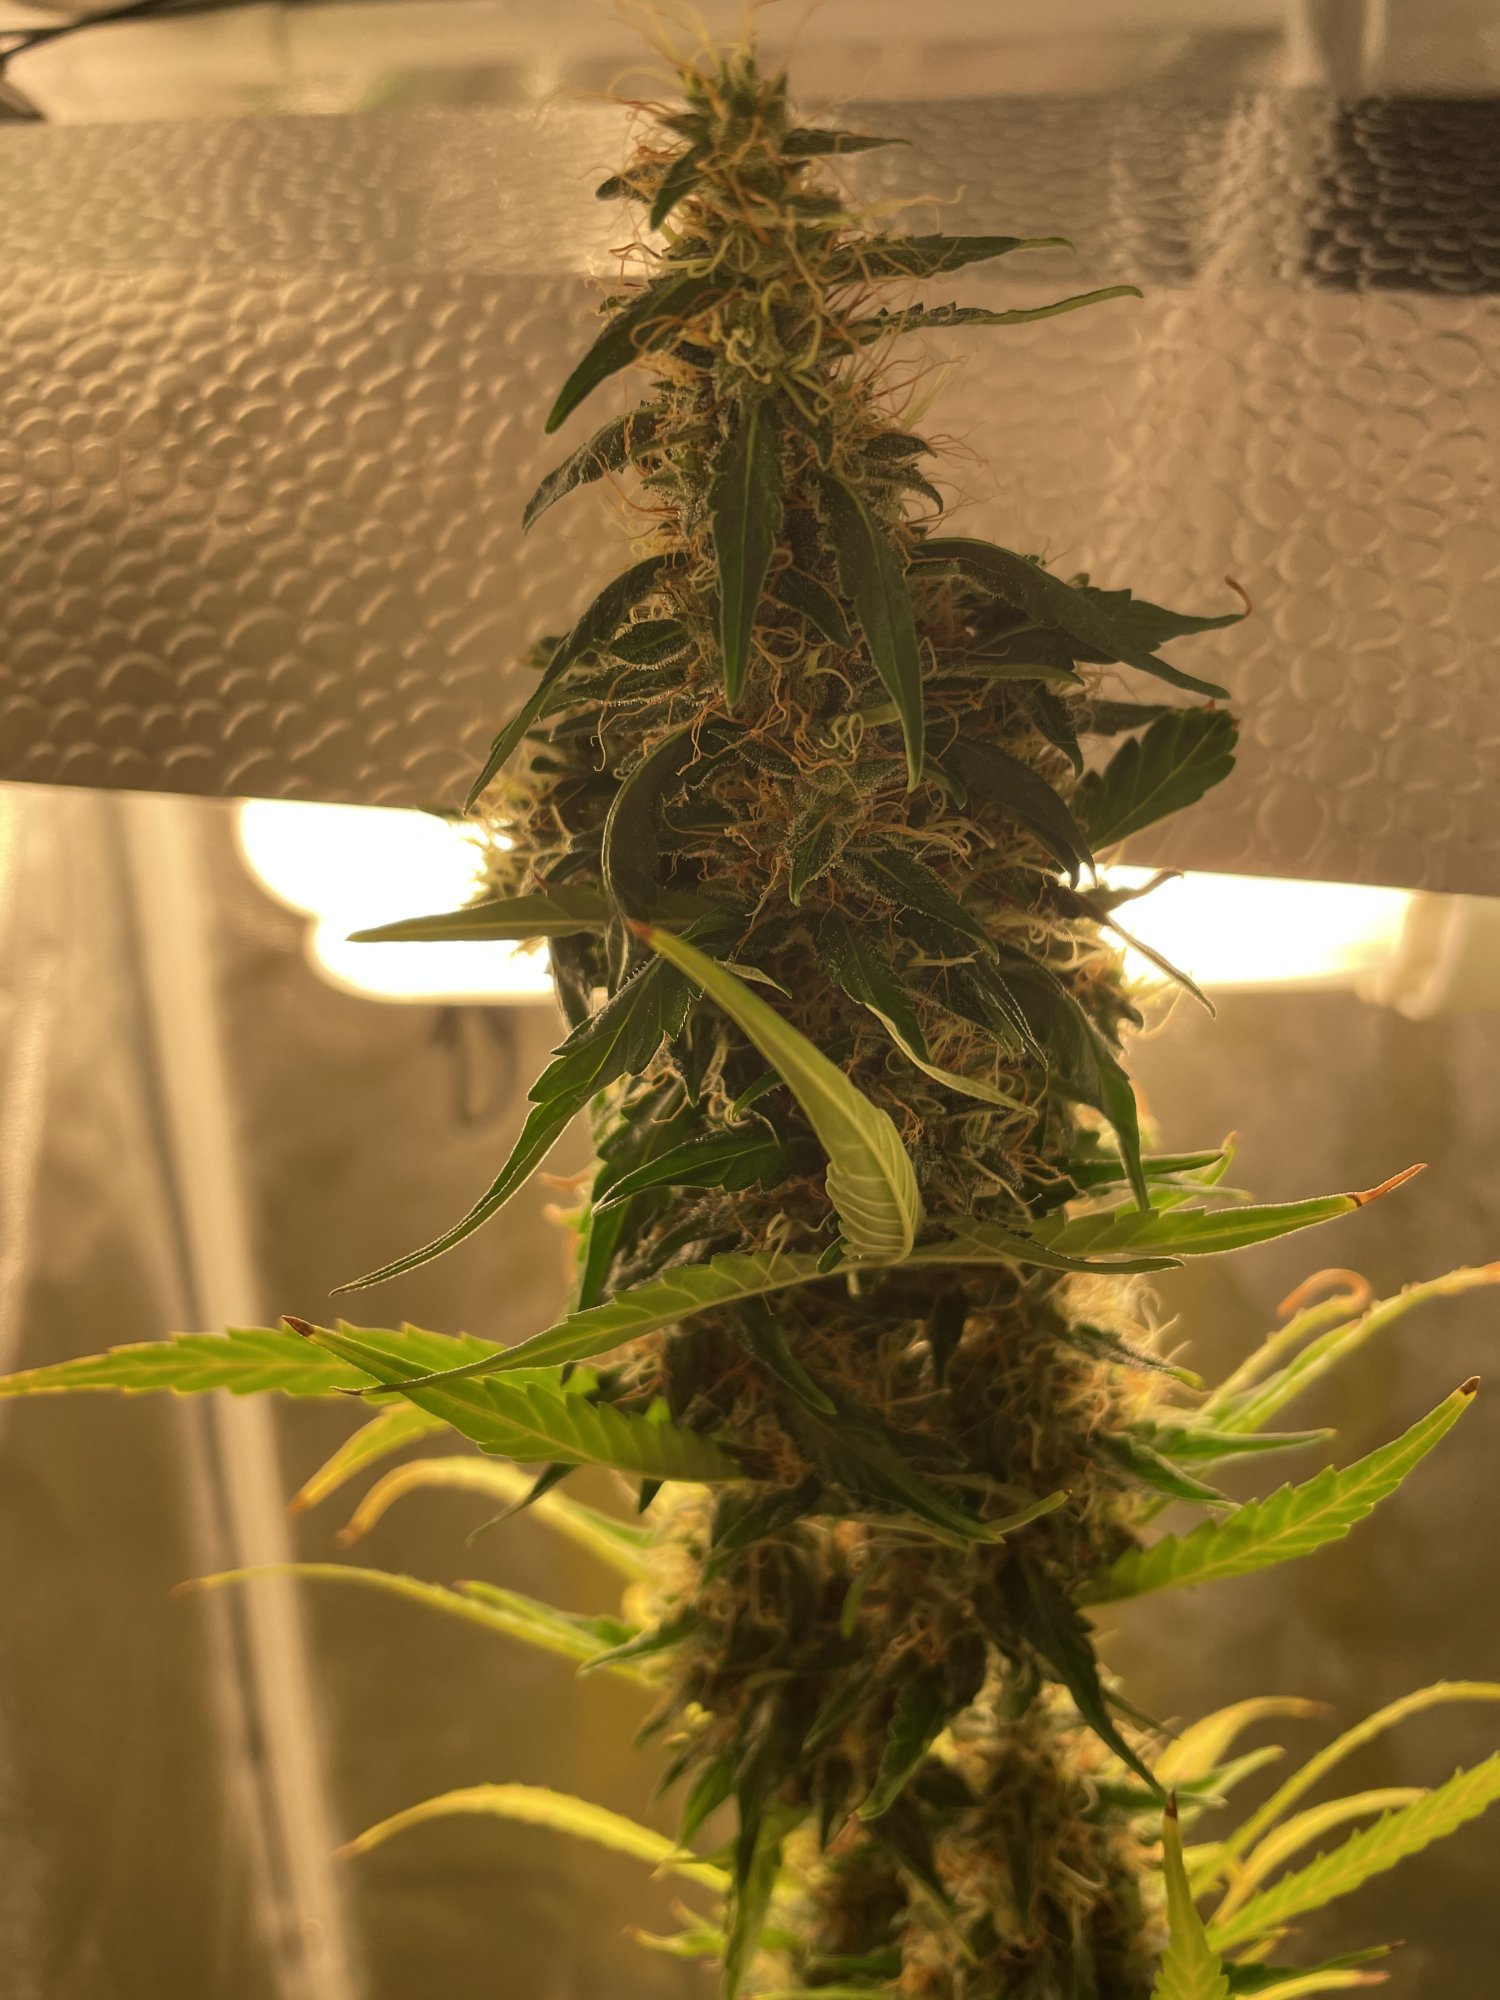 After some expertise   my auto flowering blue treacle is nearing harvest 7